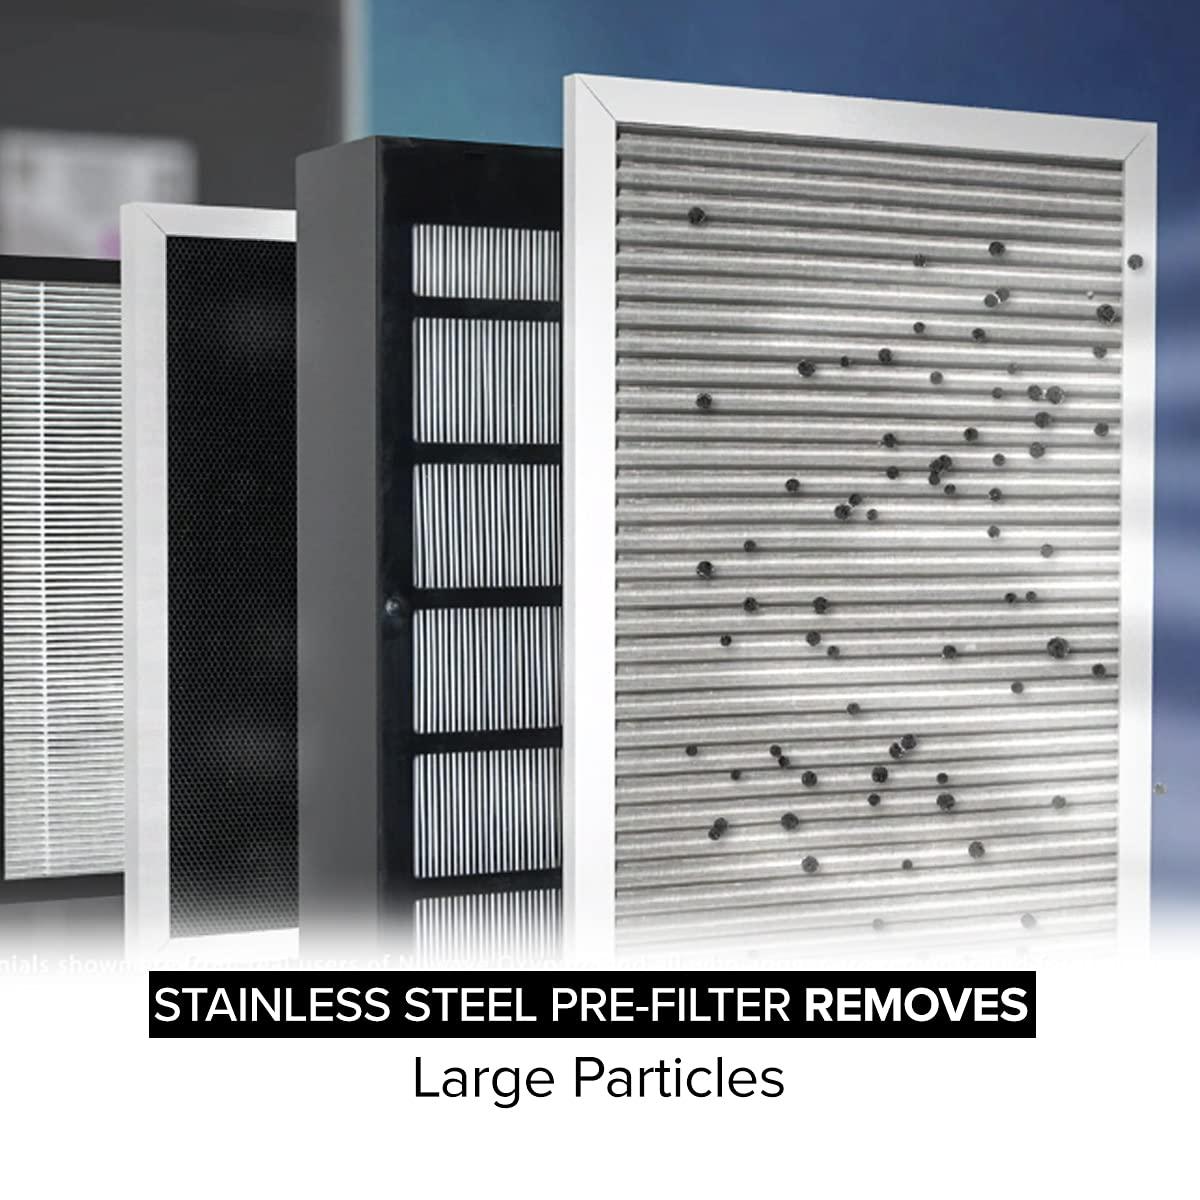 nuwave stainless steel oxypure pre-filter for large room and home to remove larger particles, pollutants and allergens includ